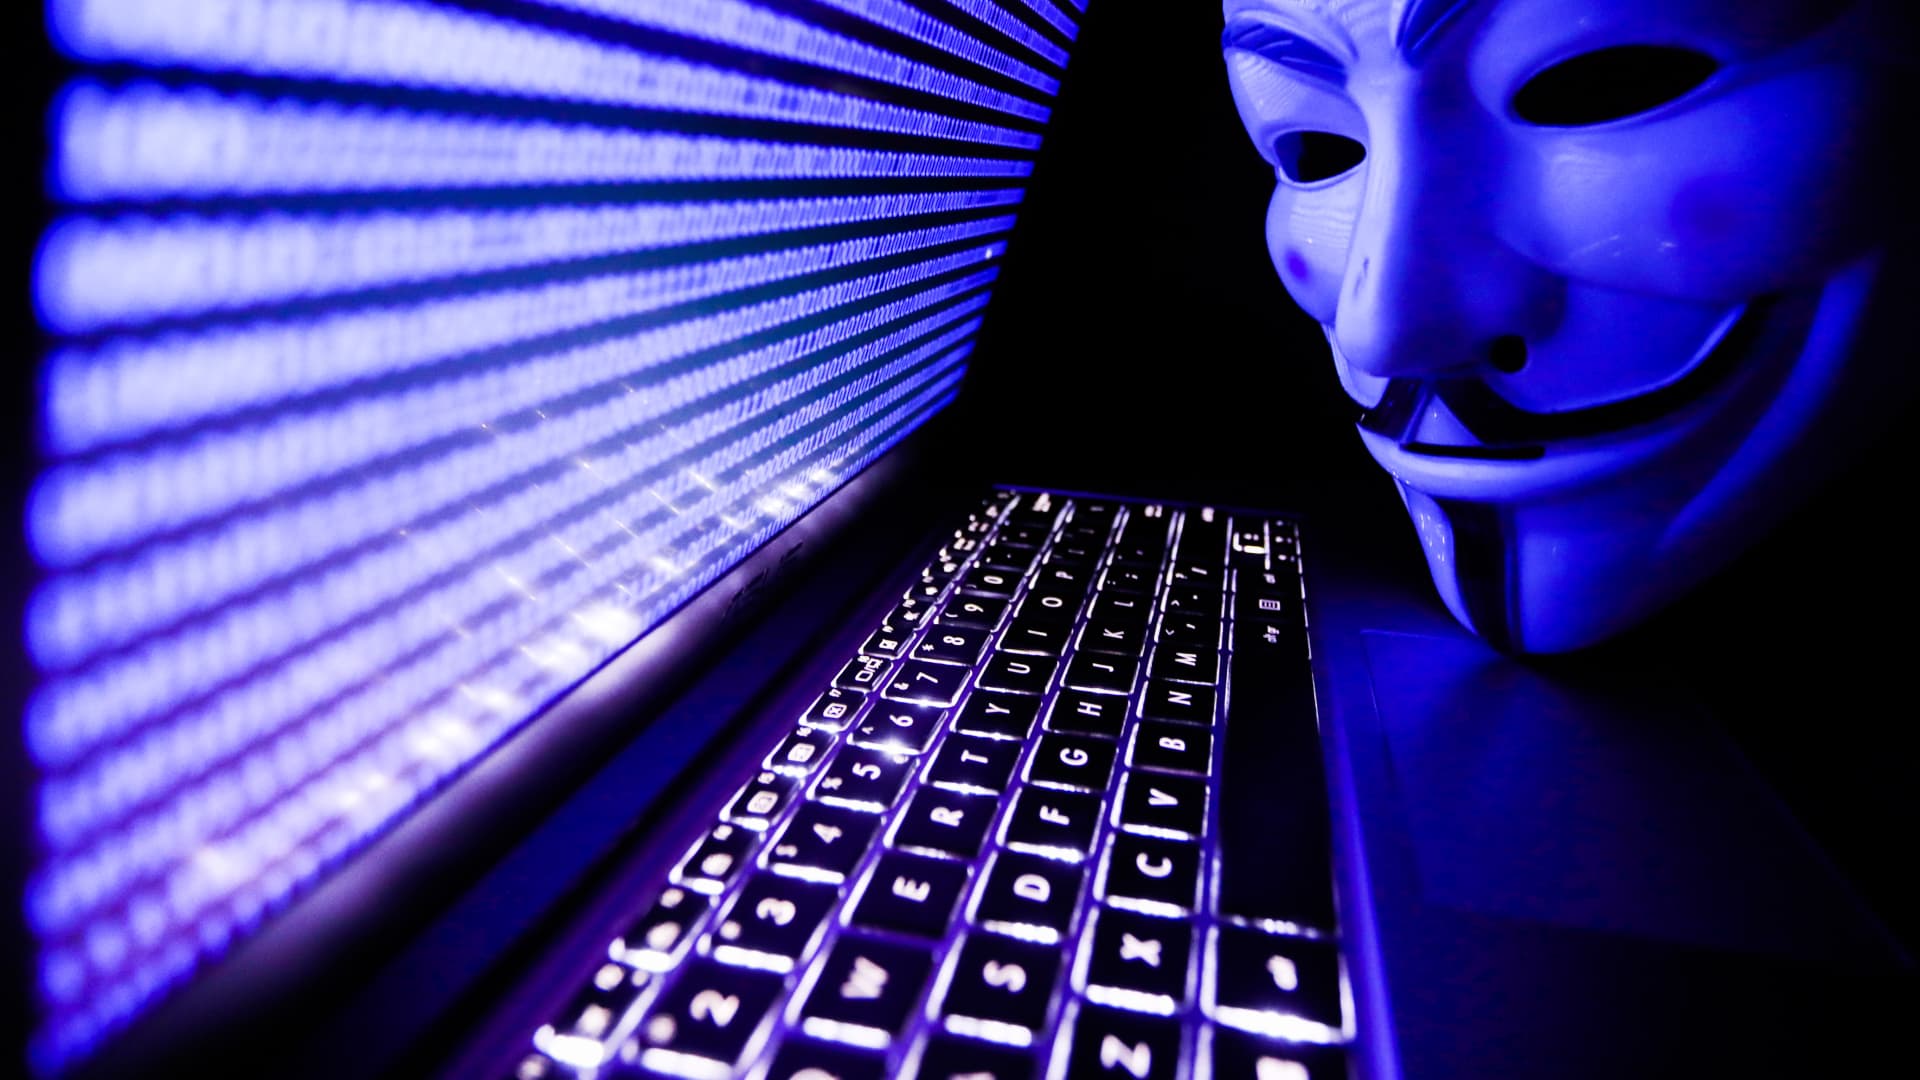 Which companies are being targeted by Anonymous? See their responses